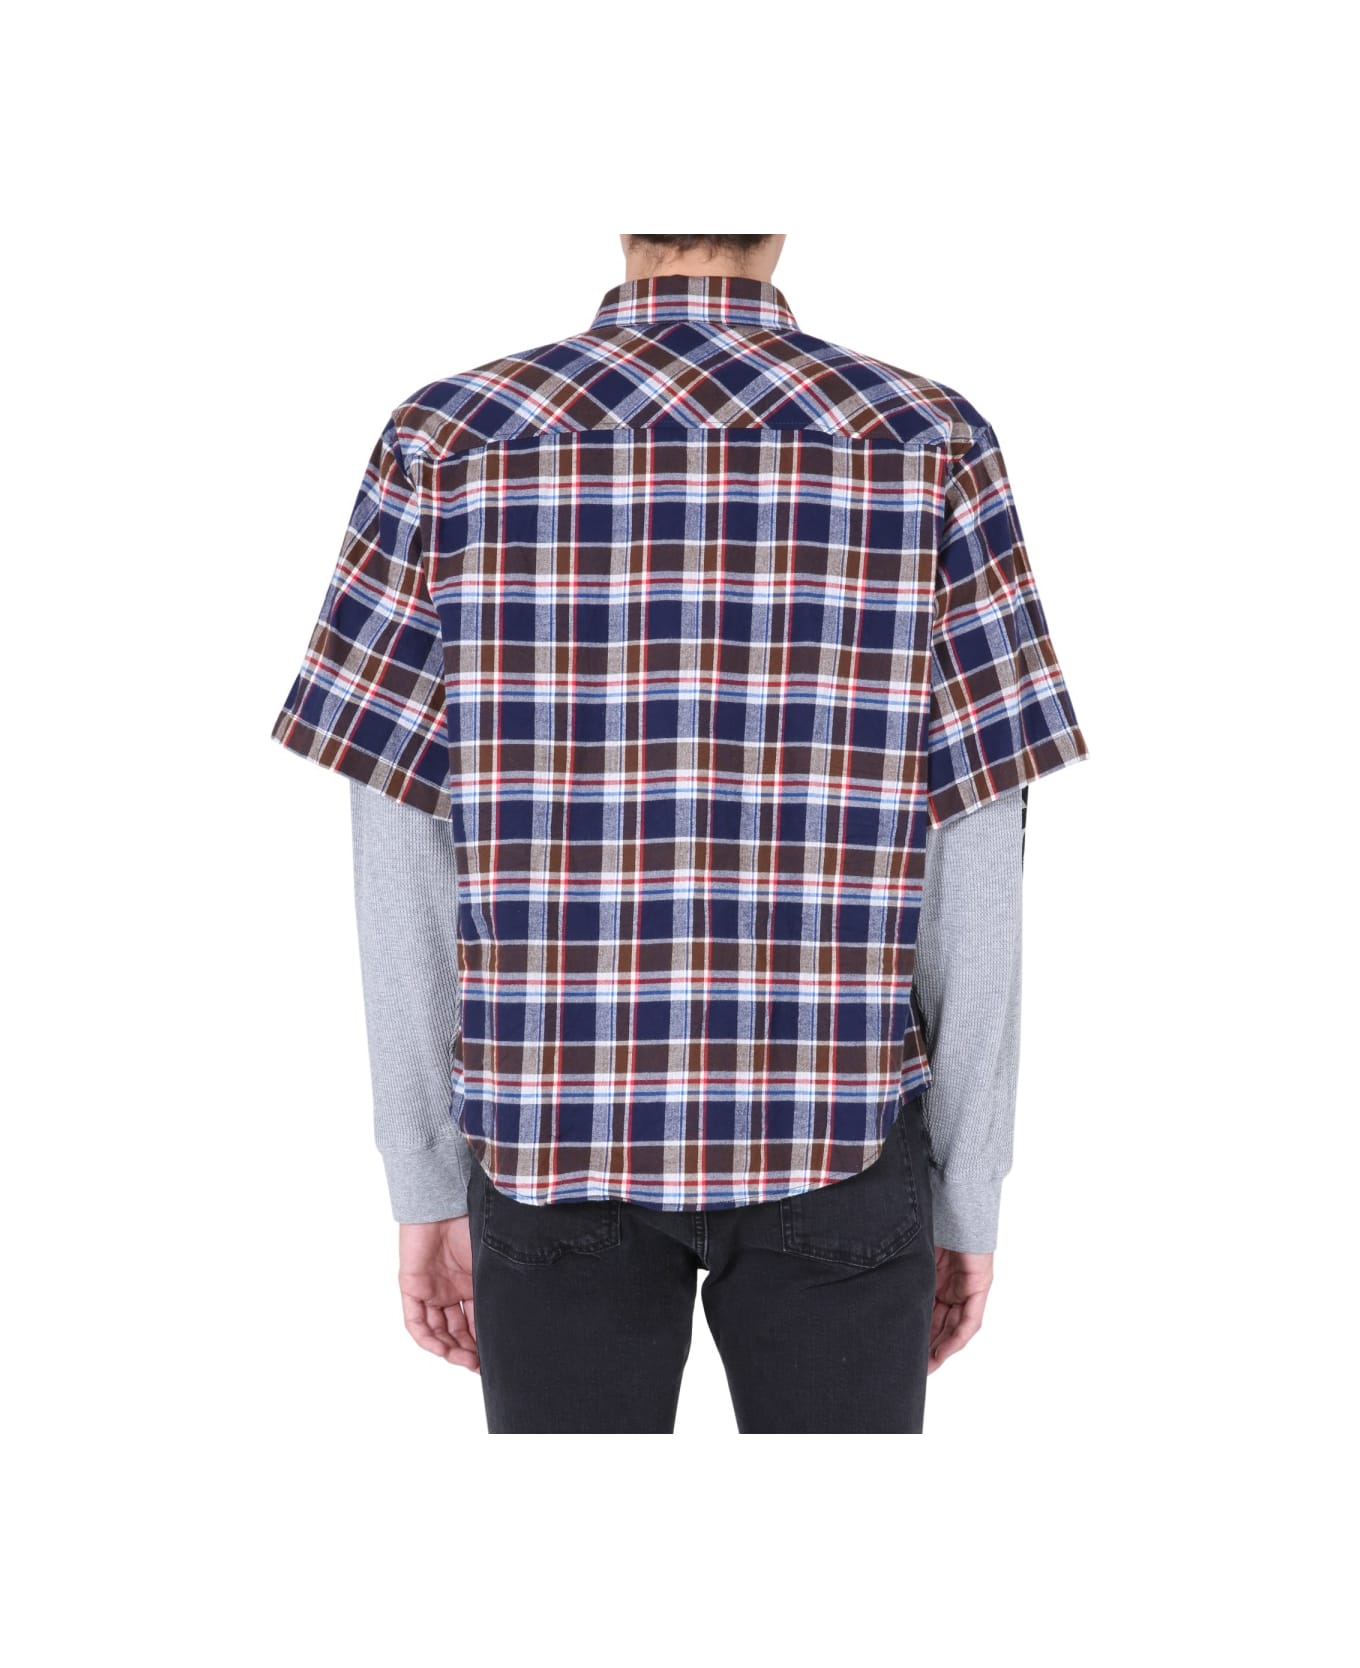 Dsquared2 Shirt With Double Sleeves - BLUE